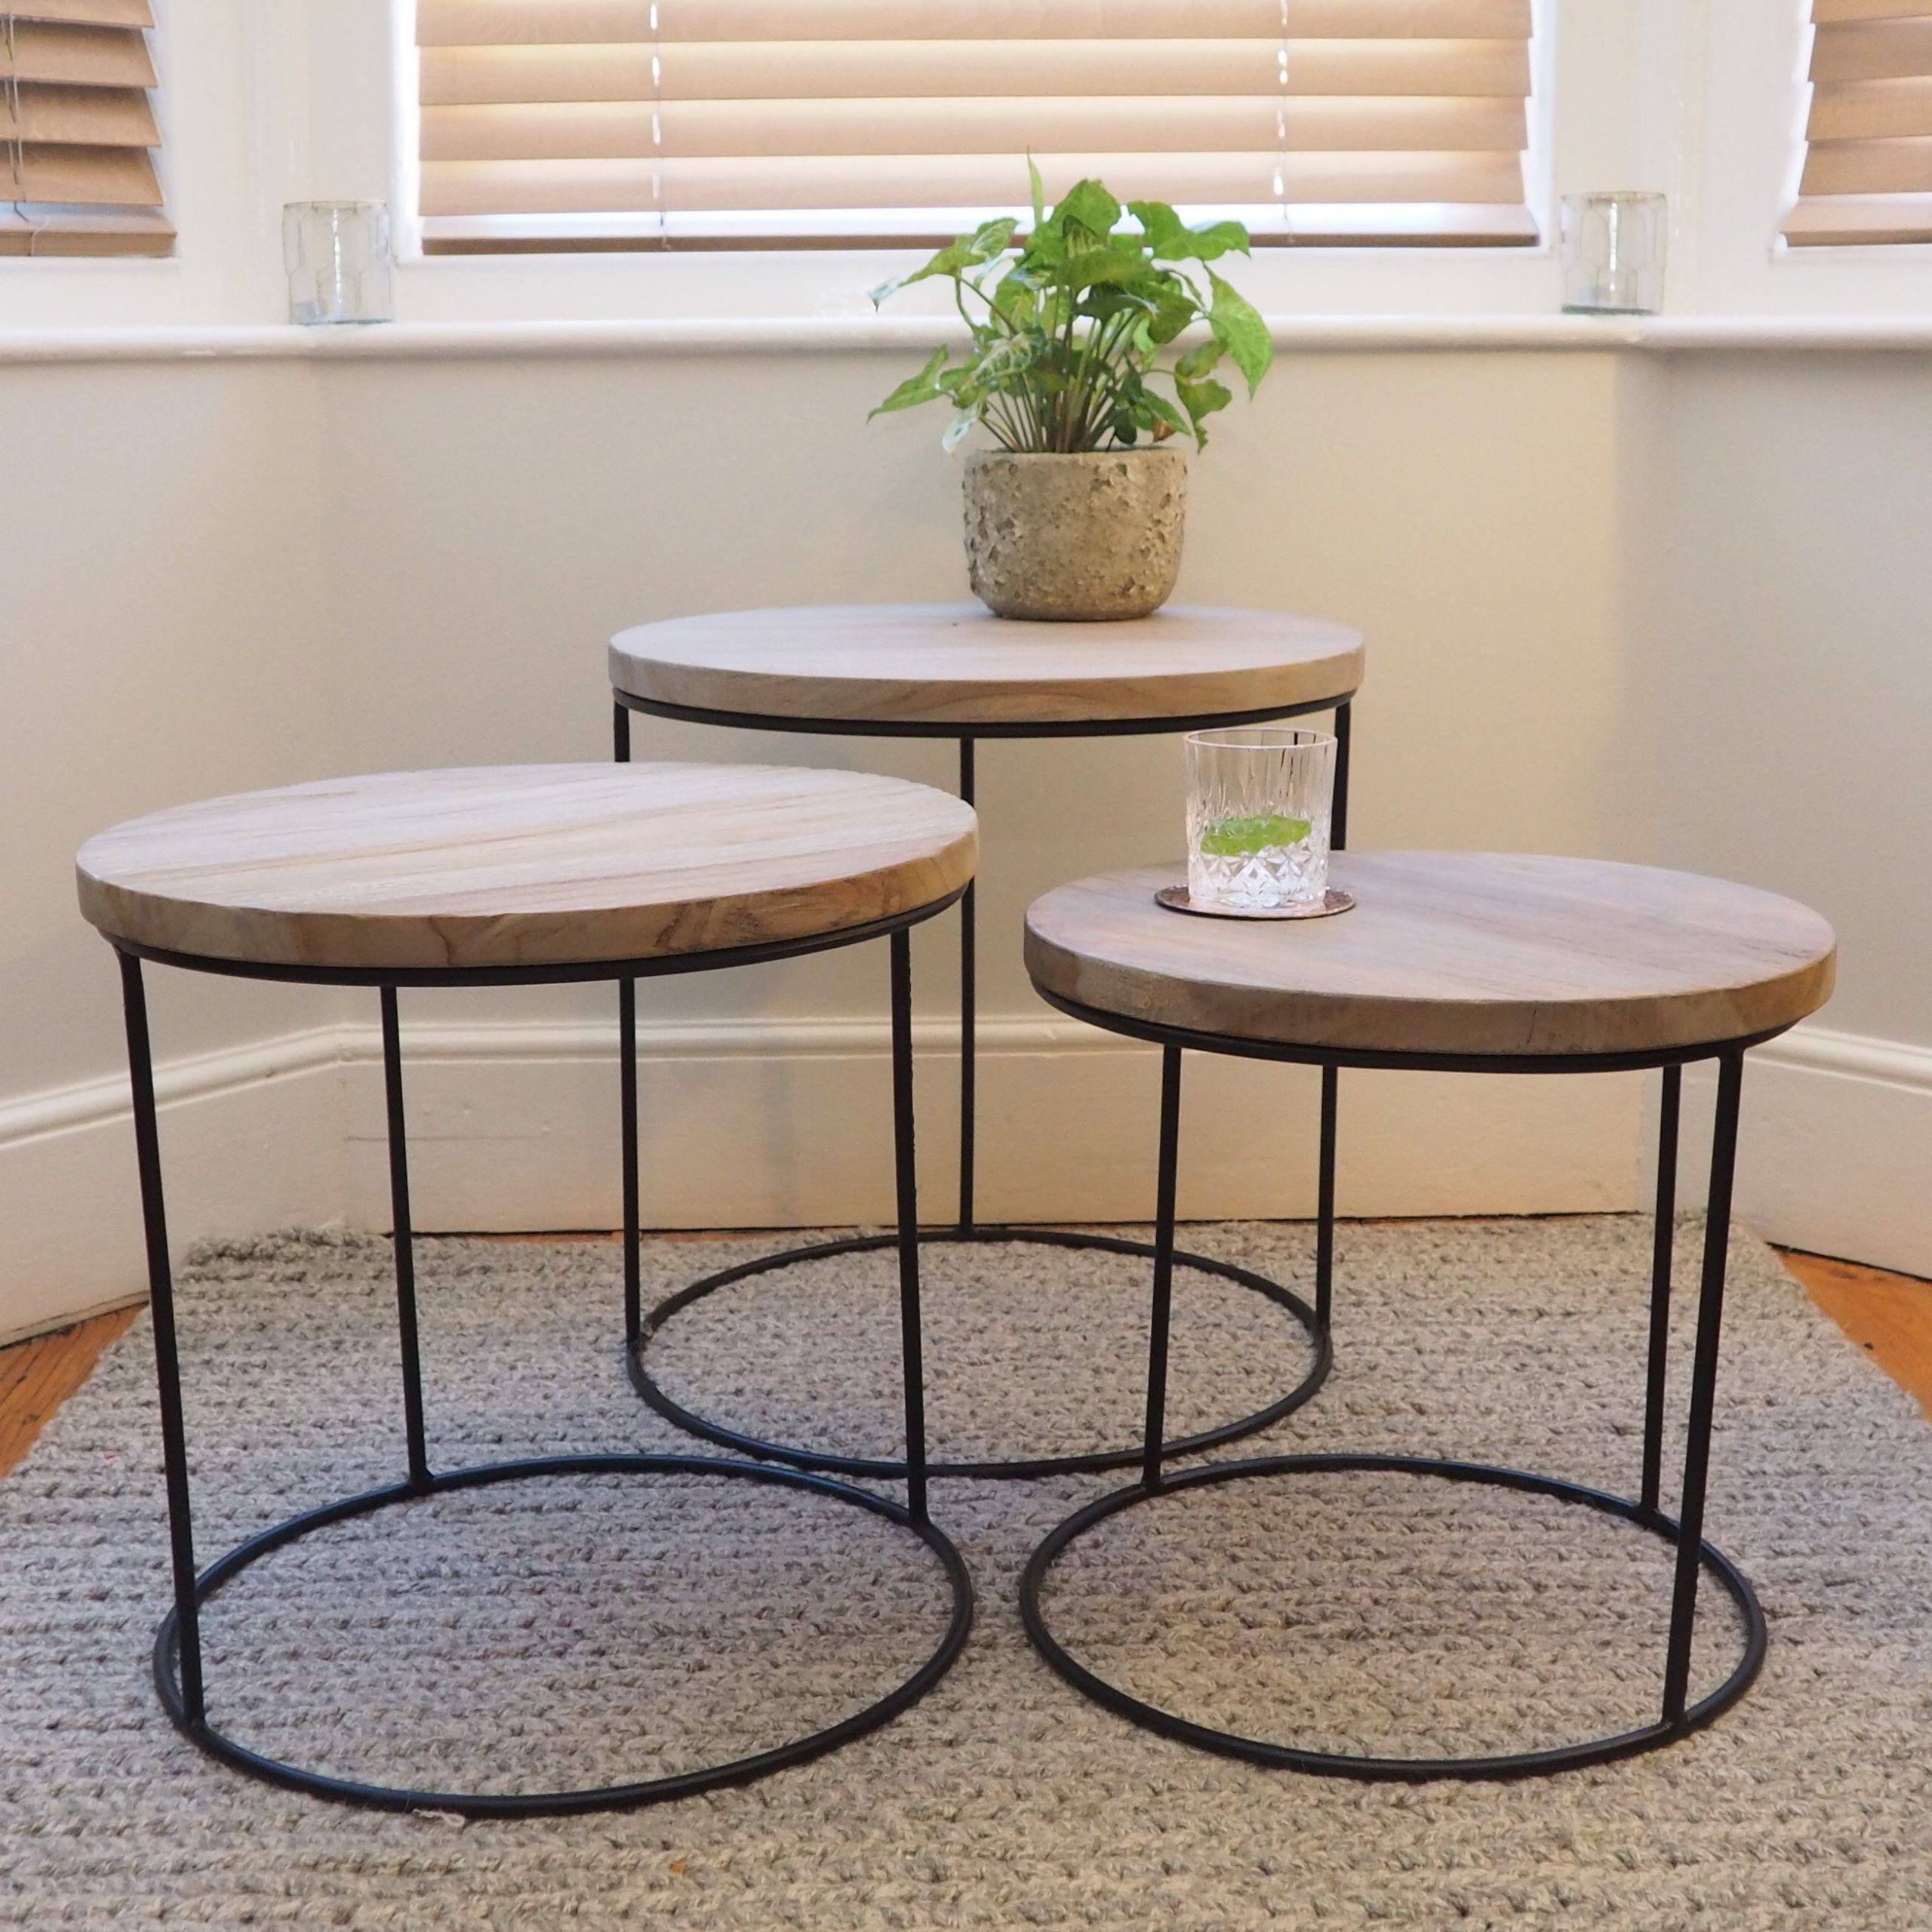 Round Nesting Tables – Za Za Homes | Nesting Tables Living Room Pertaining To Coffee Tables Of 3 Nesting Tables (View 13 of 20)